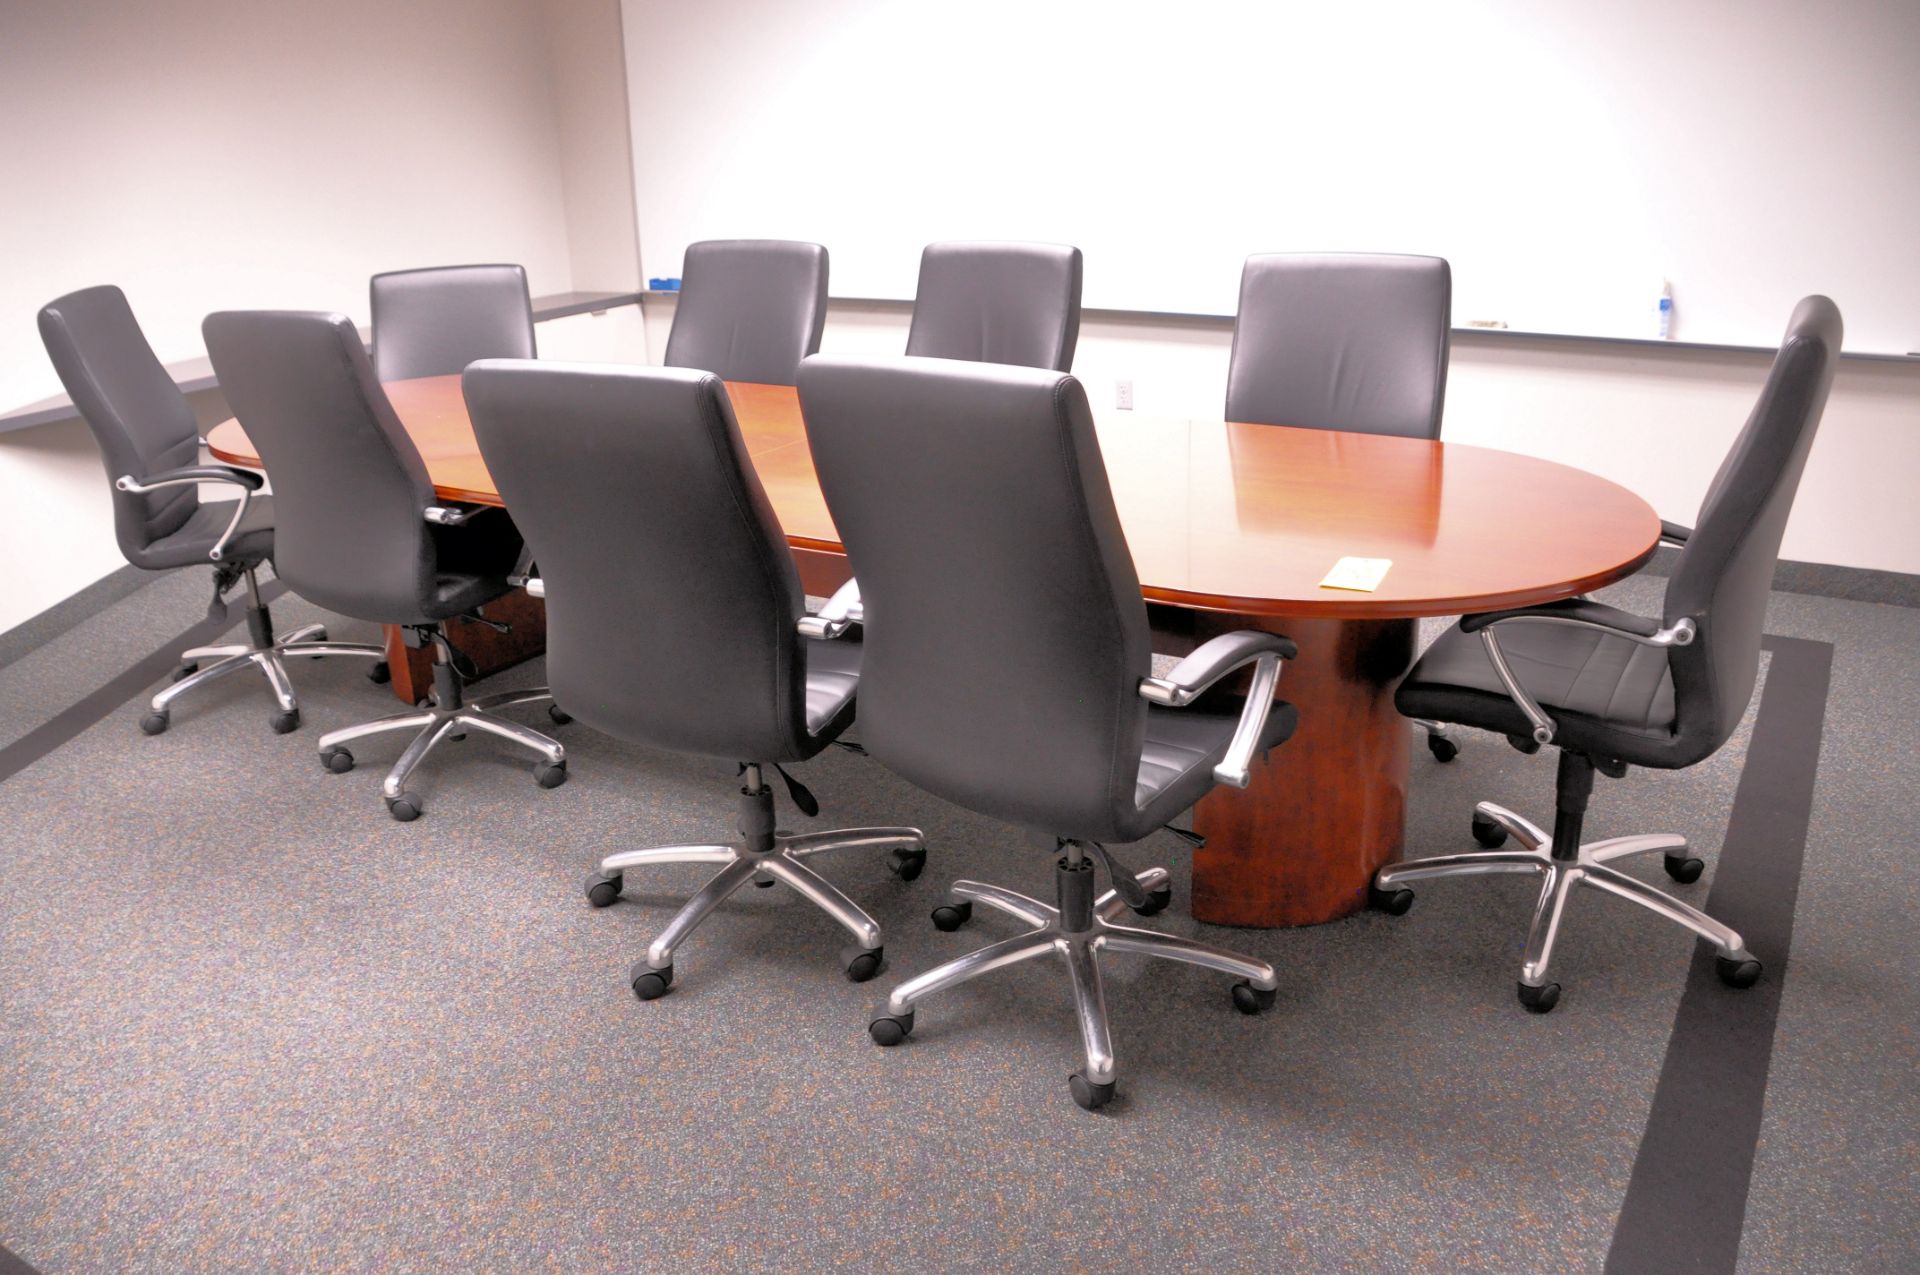 Lot-(1) 2-Piece 48" x 144" Oval Conference Table with (9) Black Swivel Office Chairs in (1) Room, (